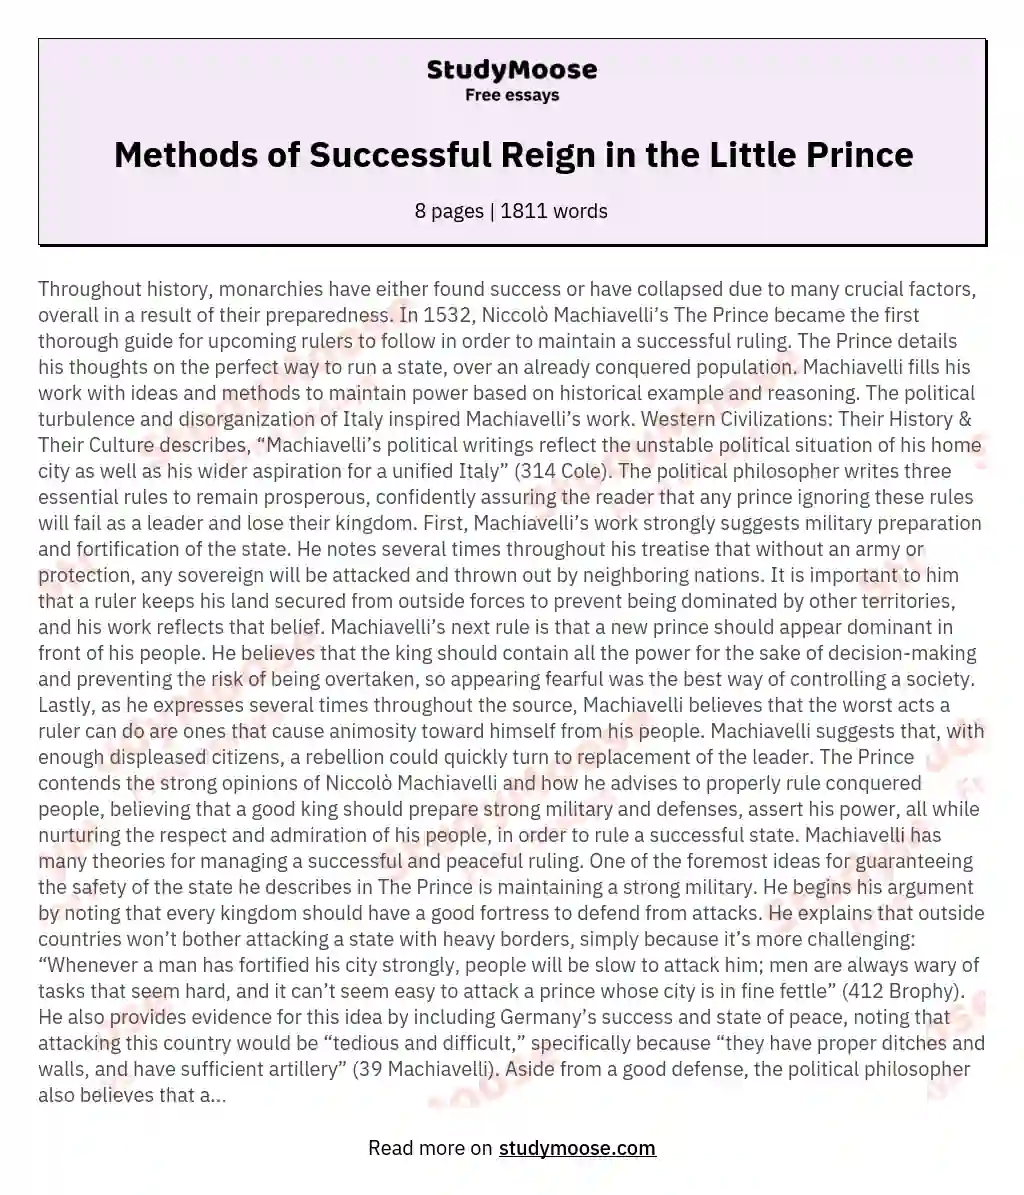 Methods of Successful Reign in the Little Prince essay